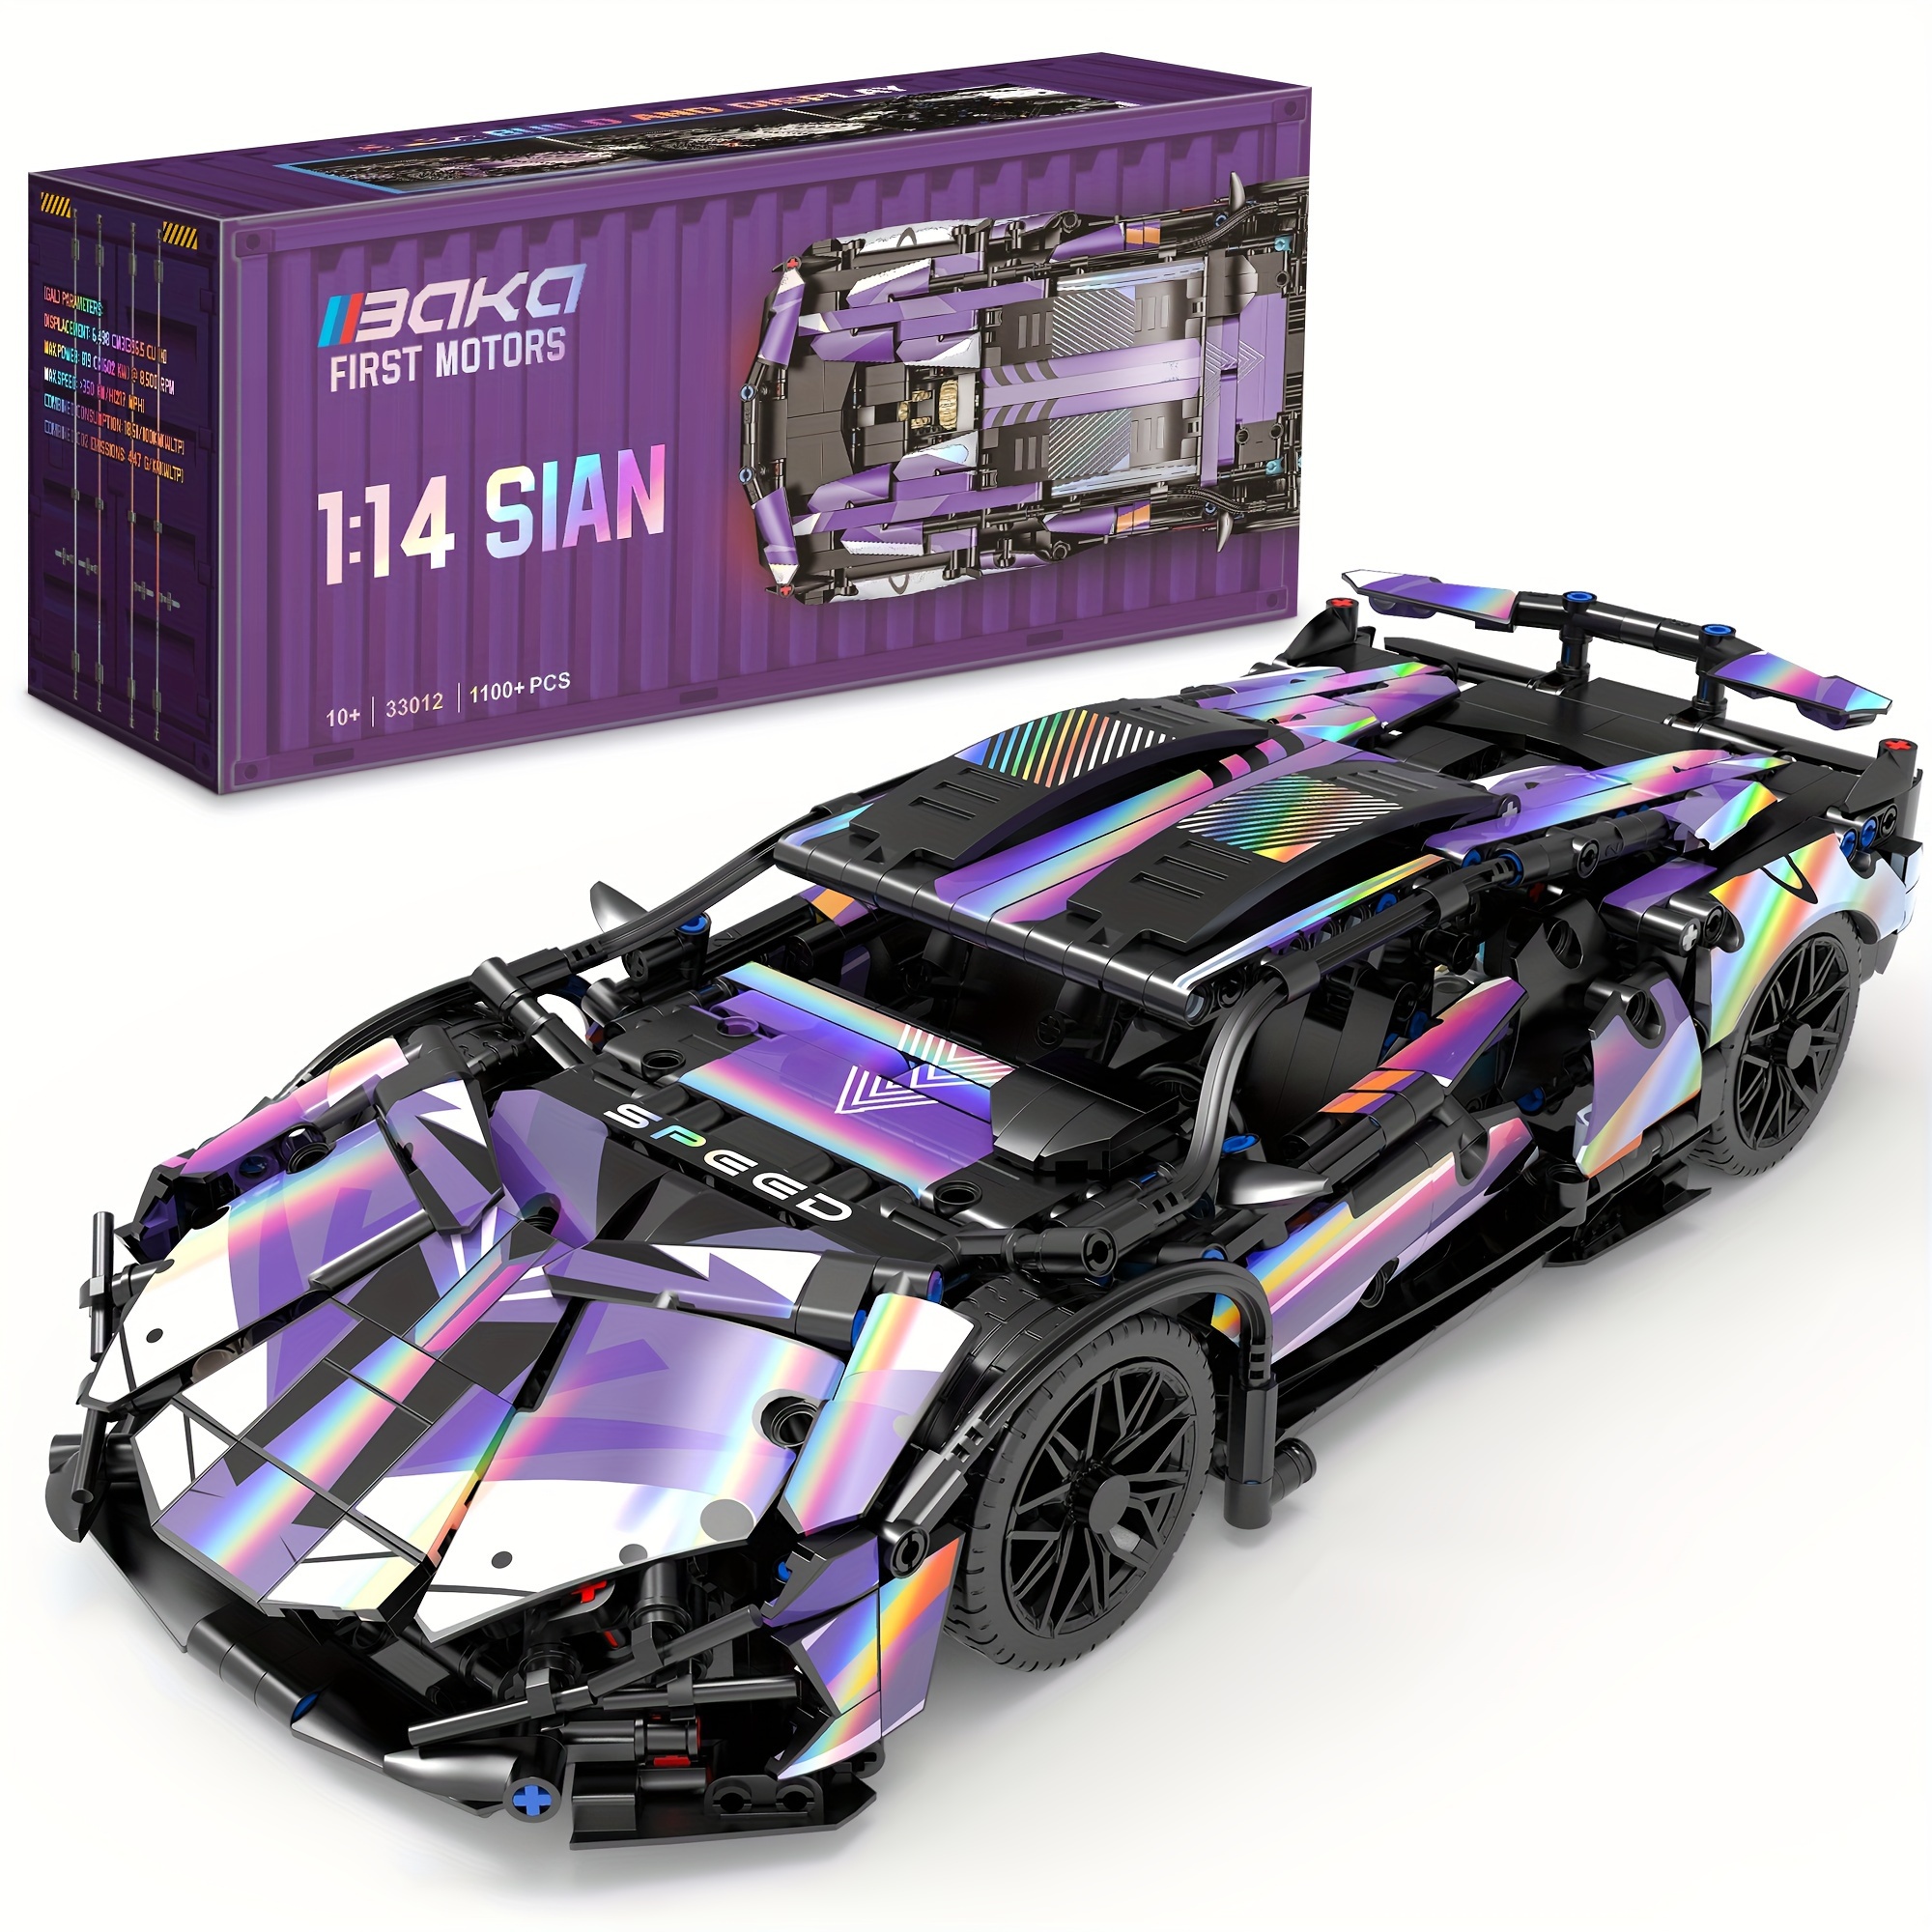 

Sports Cars Building Kit For Kids, Teens, And Adults - Stem Educational Construction Toys Car 1:14 Technic-model, Birthday Gifts Toys For 10 11 12+ Year Old Boys, Girls